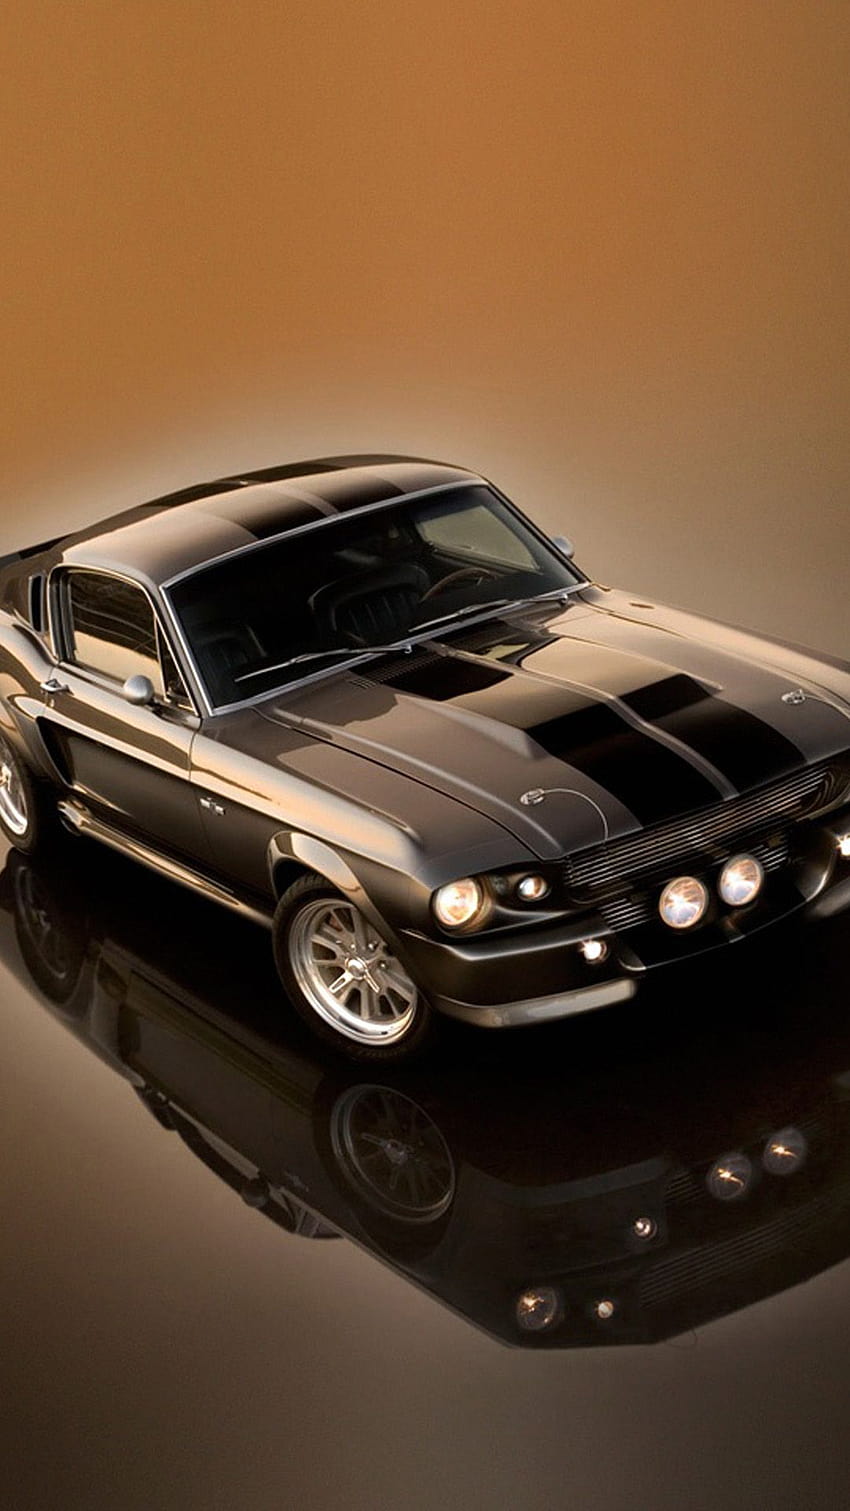 Mustang Shelby Gt500 Eleanor Iphone 6 Iphone, ford mustang 1969 iphone Sfondo del telefono HD